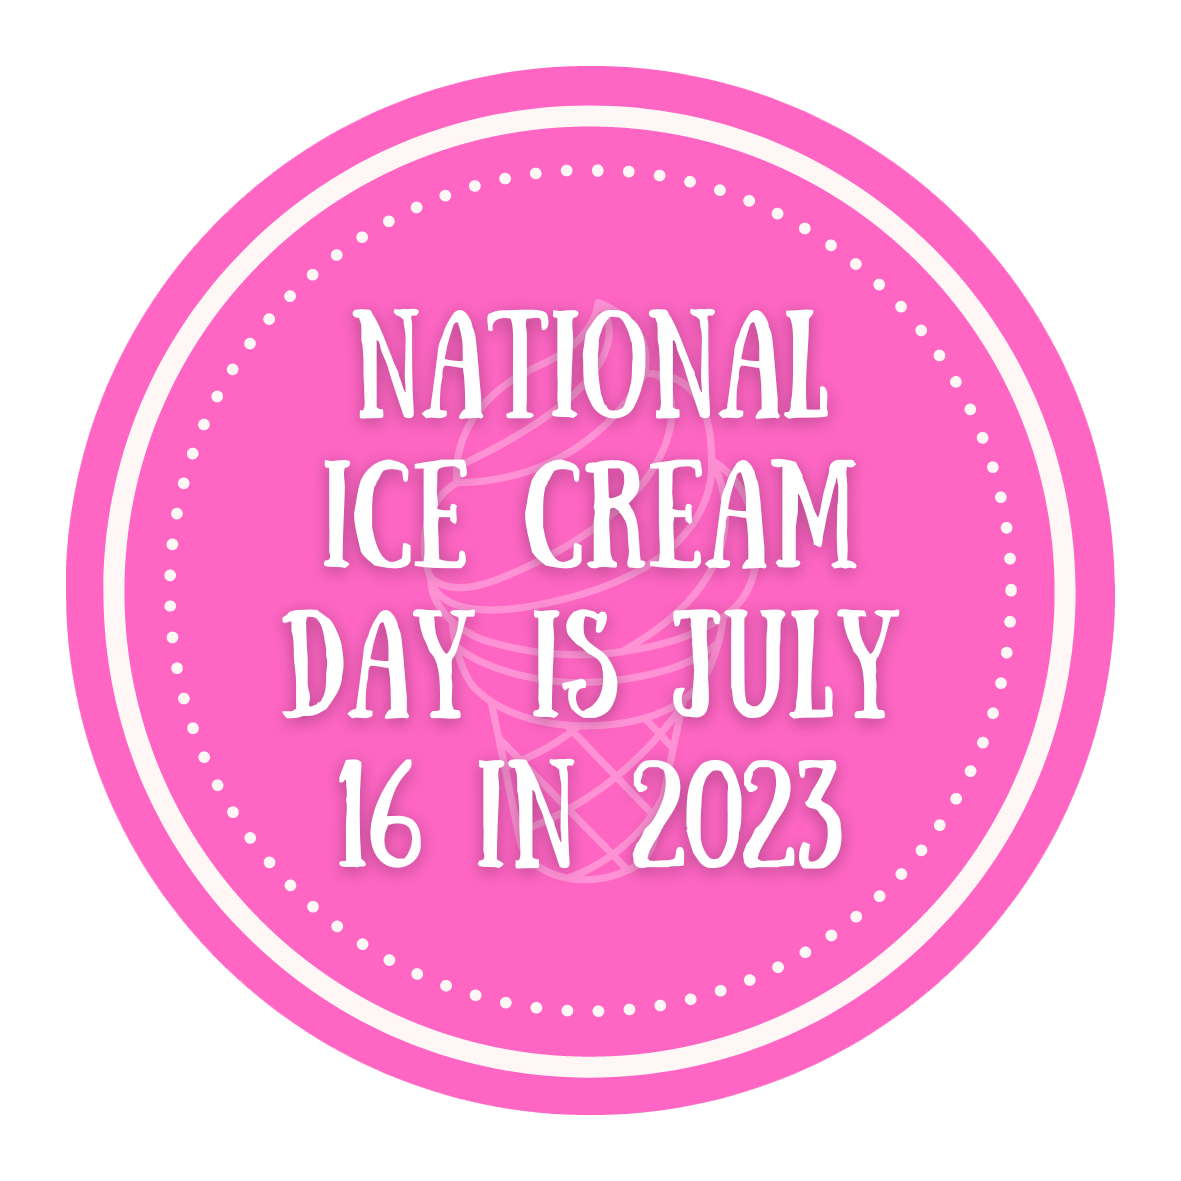 National Ice Cream Day is July 16 in 2023